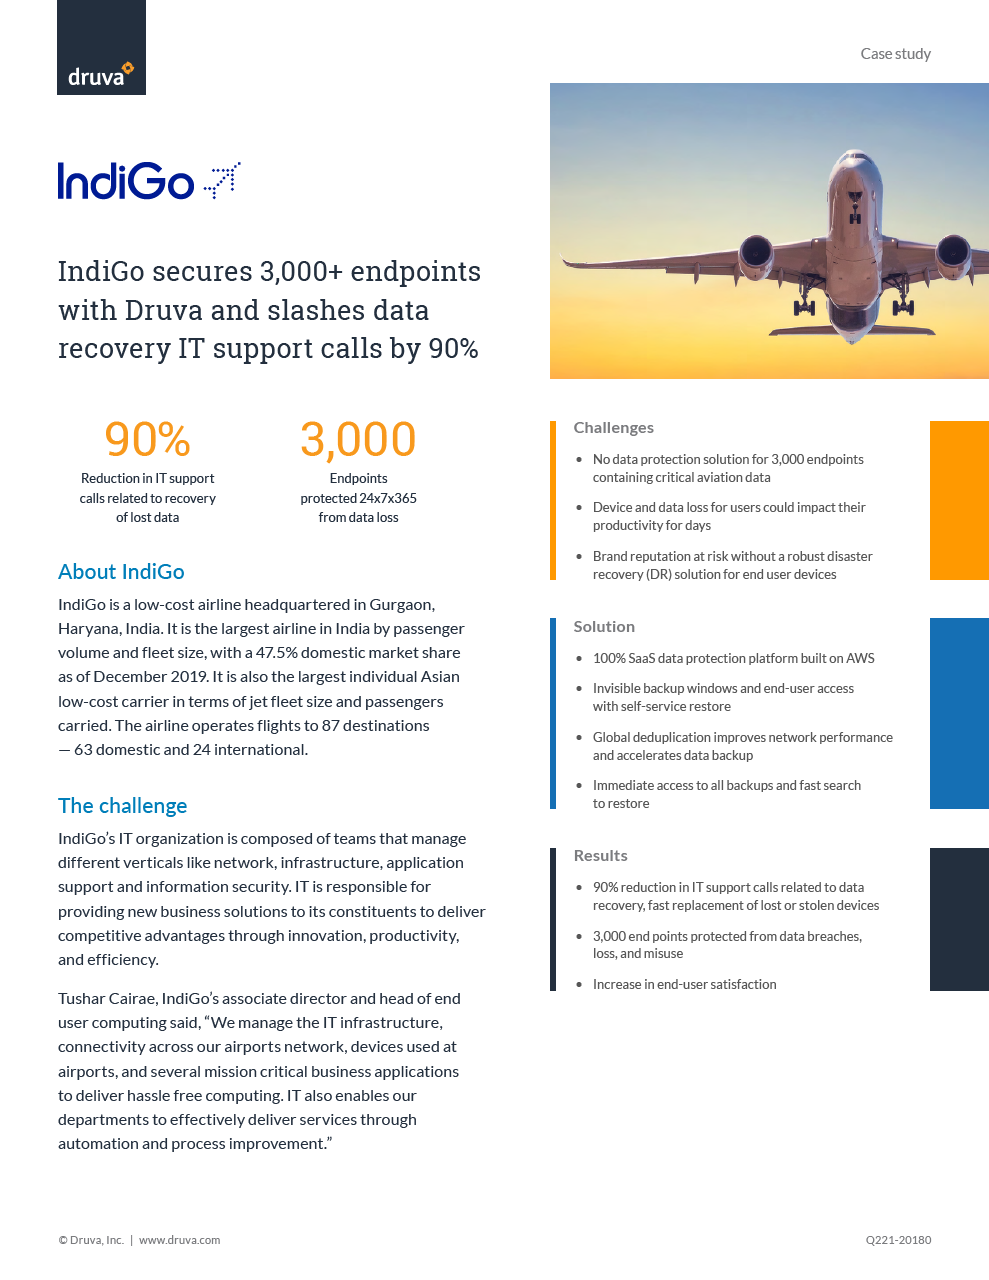  IndiGo secures 3,000+ endpoints with Druva and slashes data recovery IT support calls by 90%